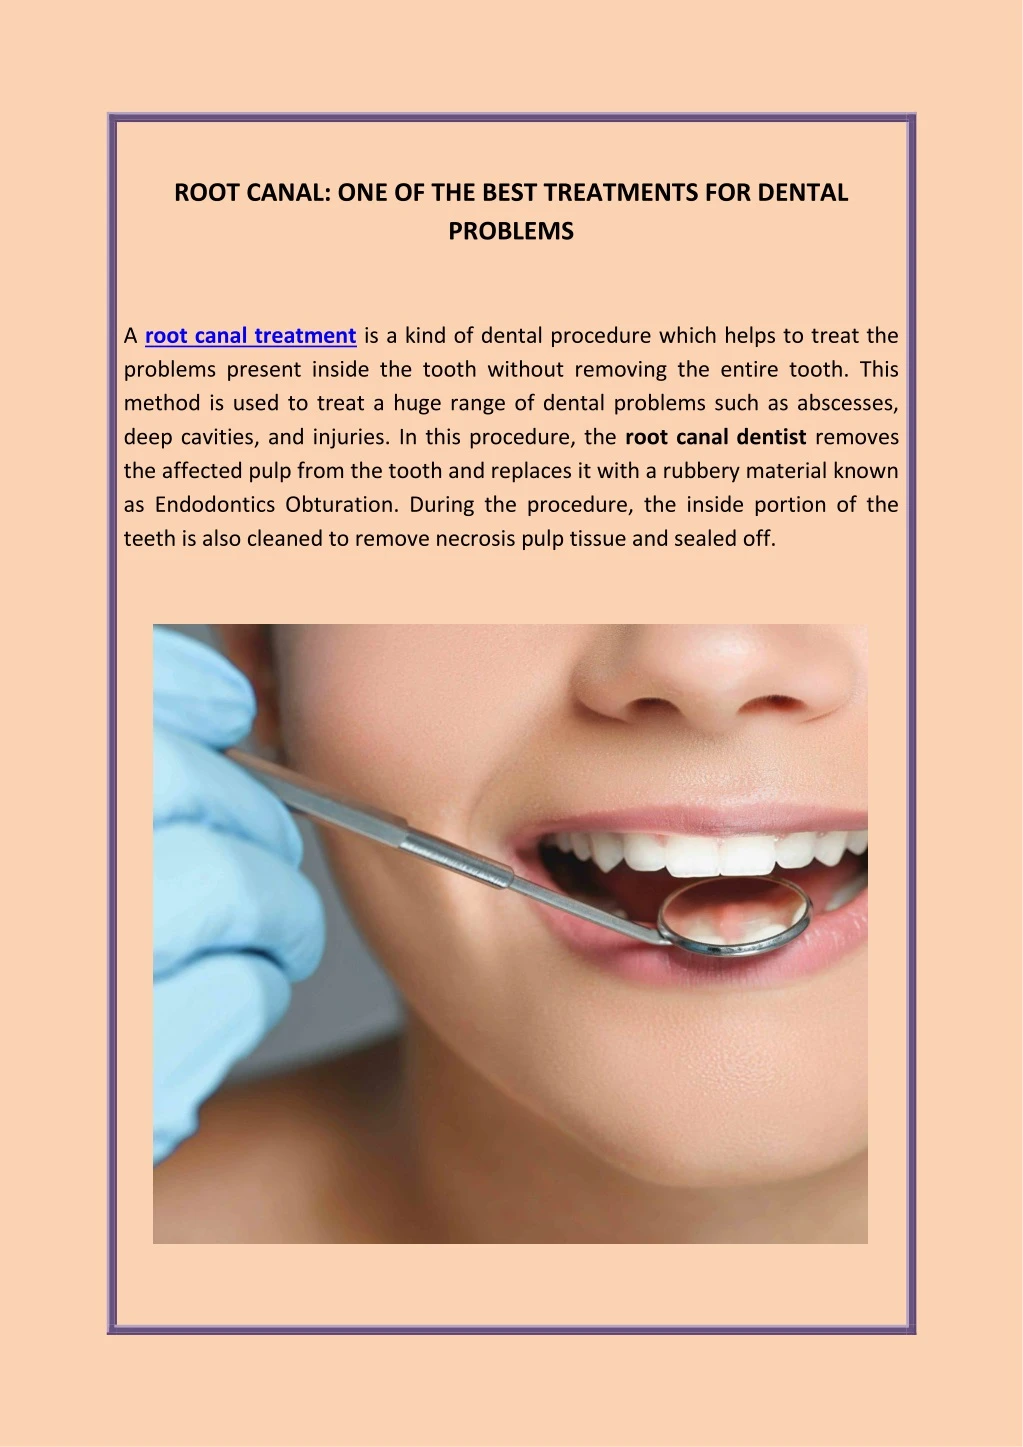 root canal one of the best treatments for dental